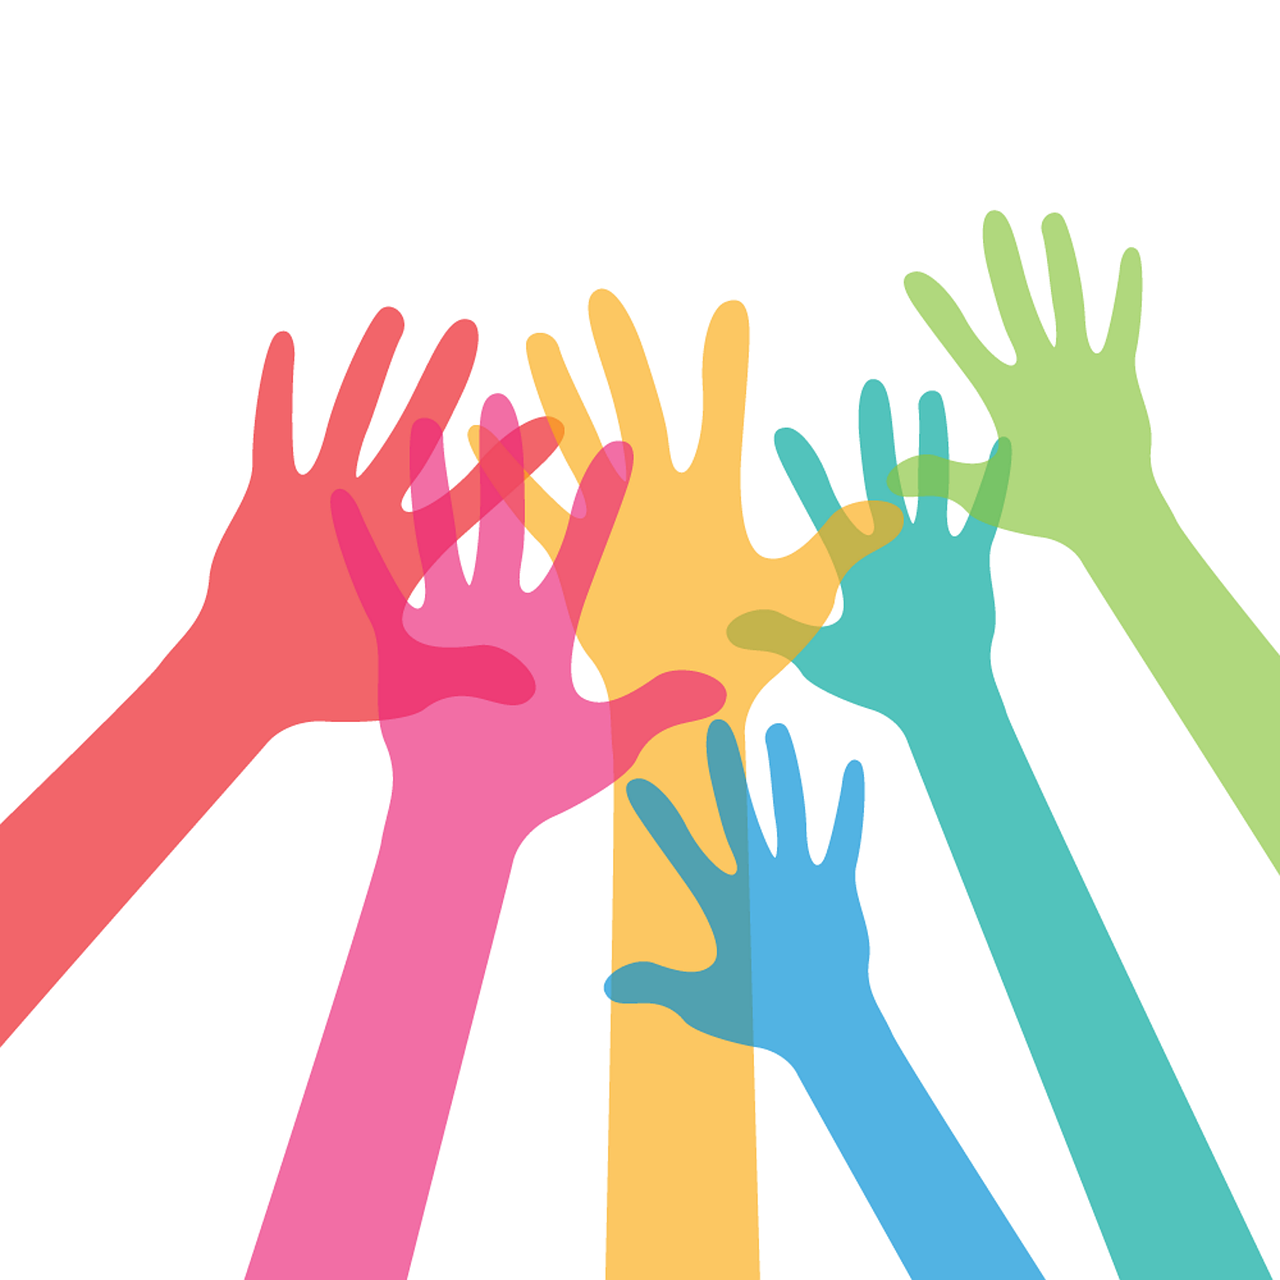 a group of multicolored hands reaching for each other, shutterstock, conceptual art, flat illustration, hands up, highkey, animation